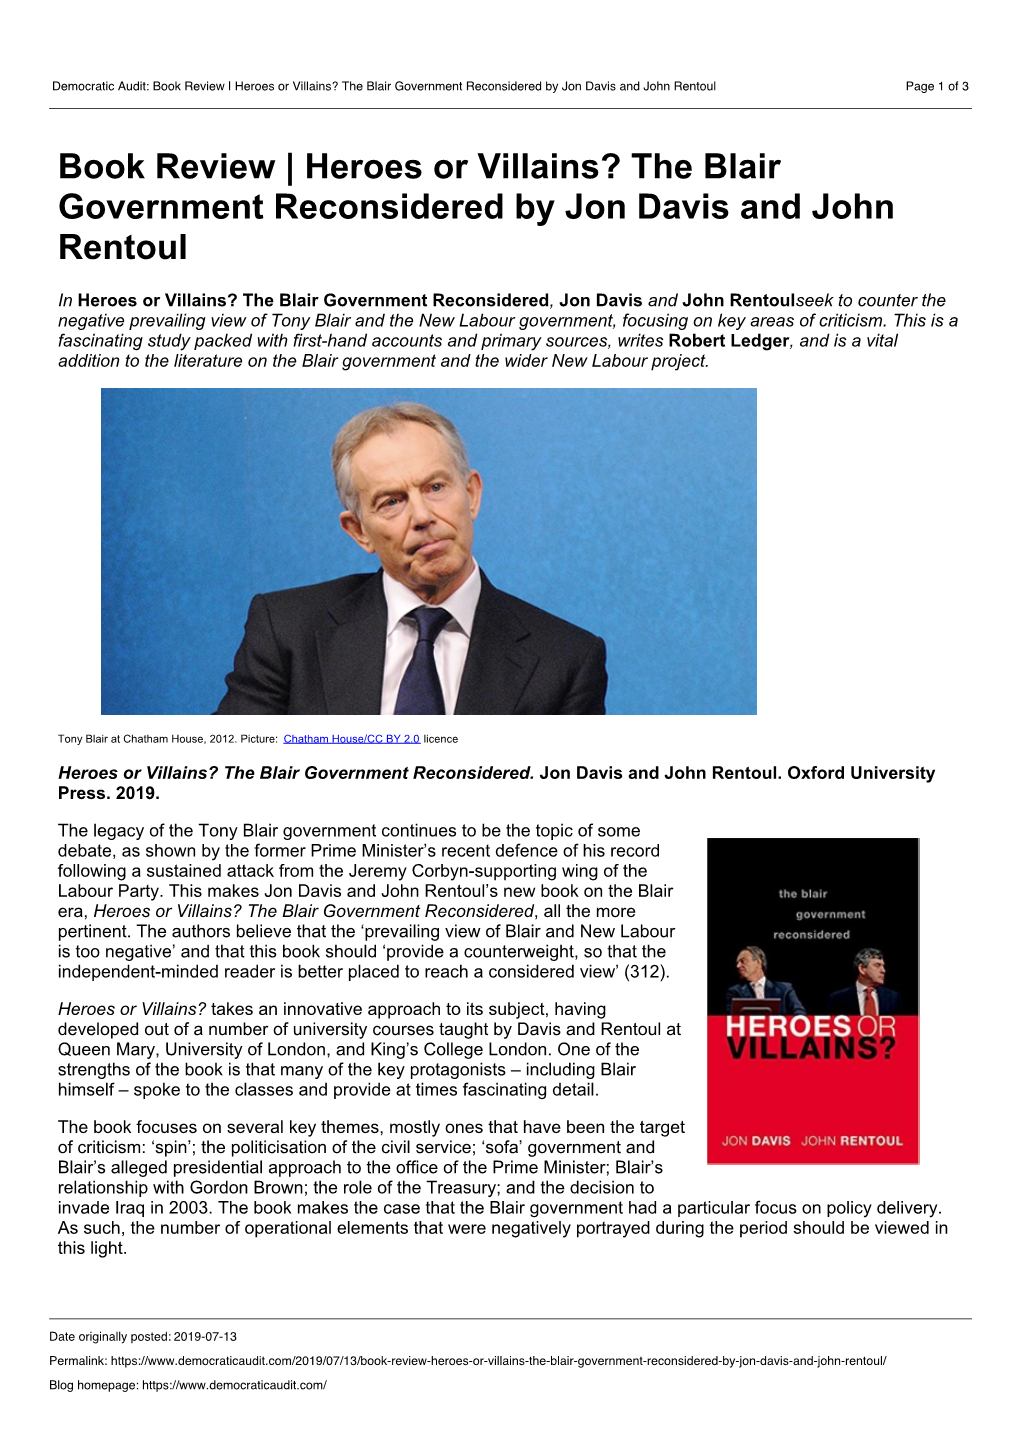 The Blair Government Reconsidered by Jon Davis and John Rentoul Page 1 of 3